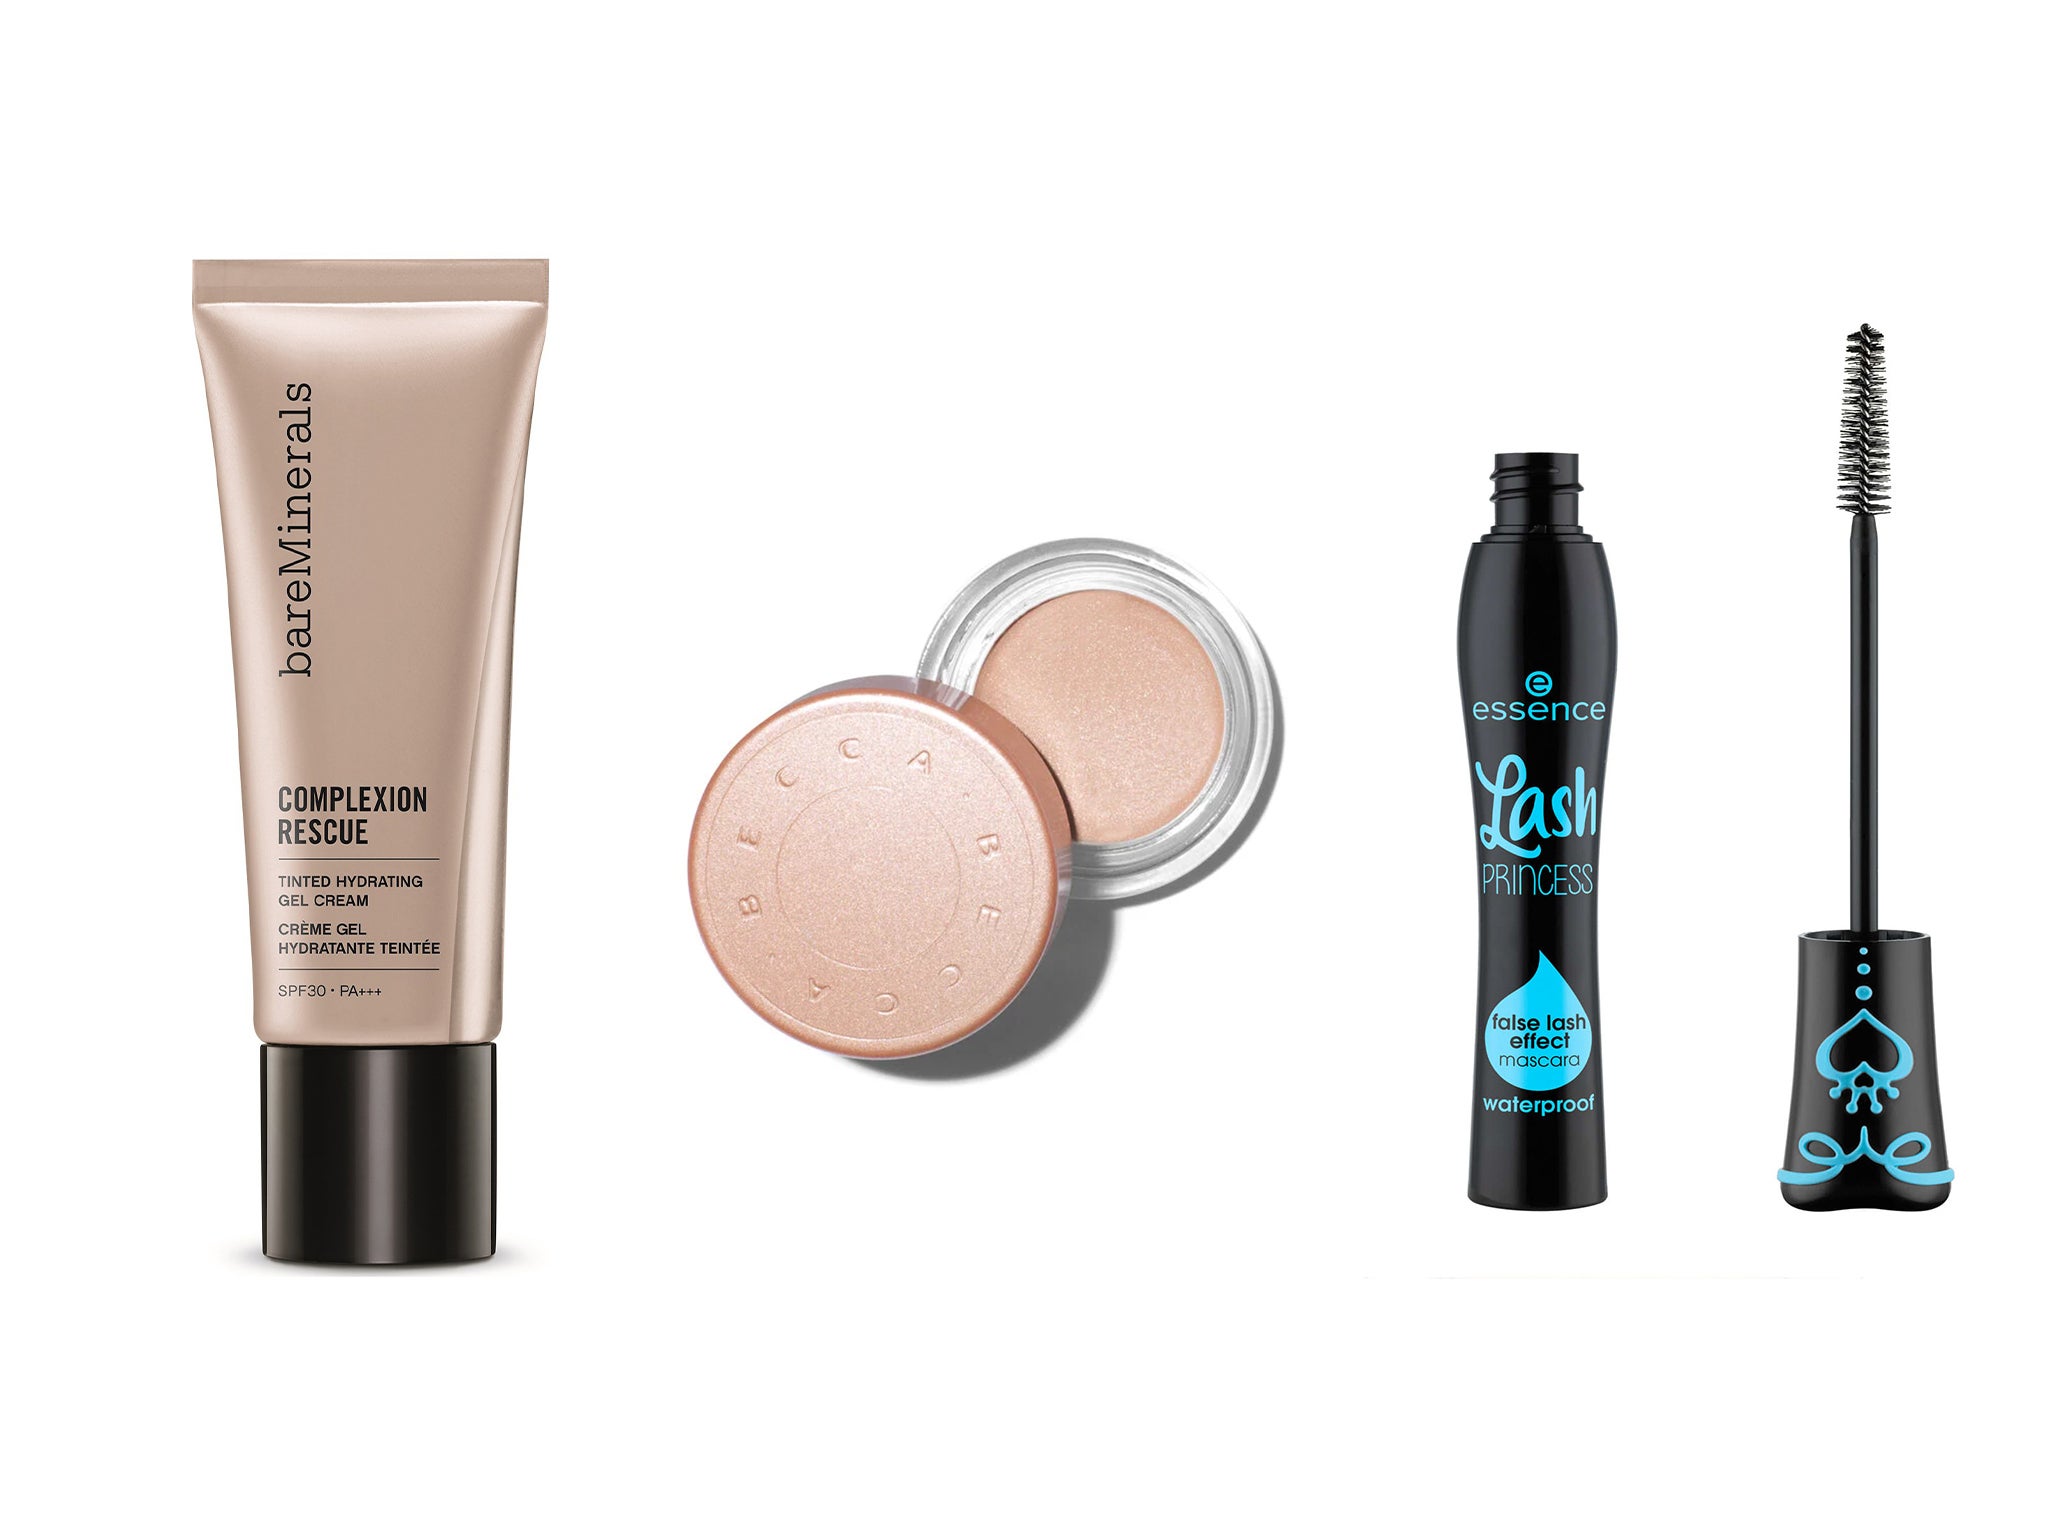 For lightweight, hot-weather friendly makeup, try these products that will last all day